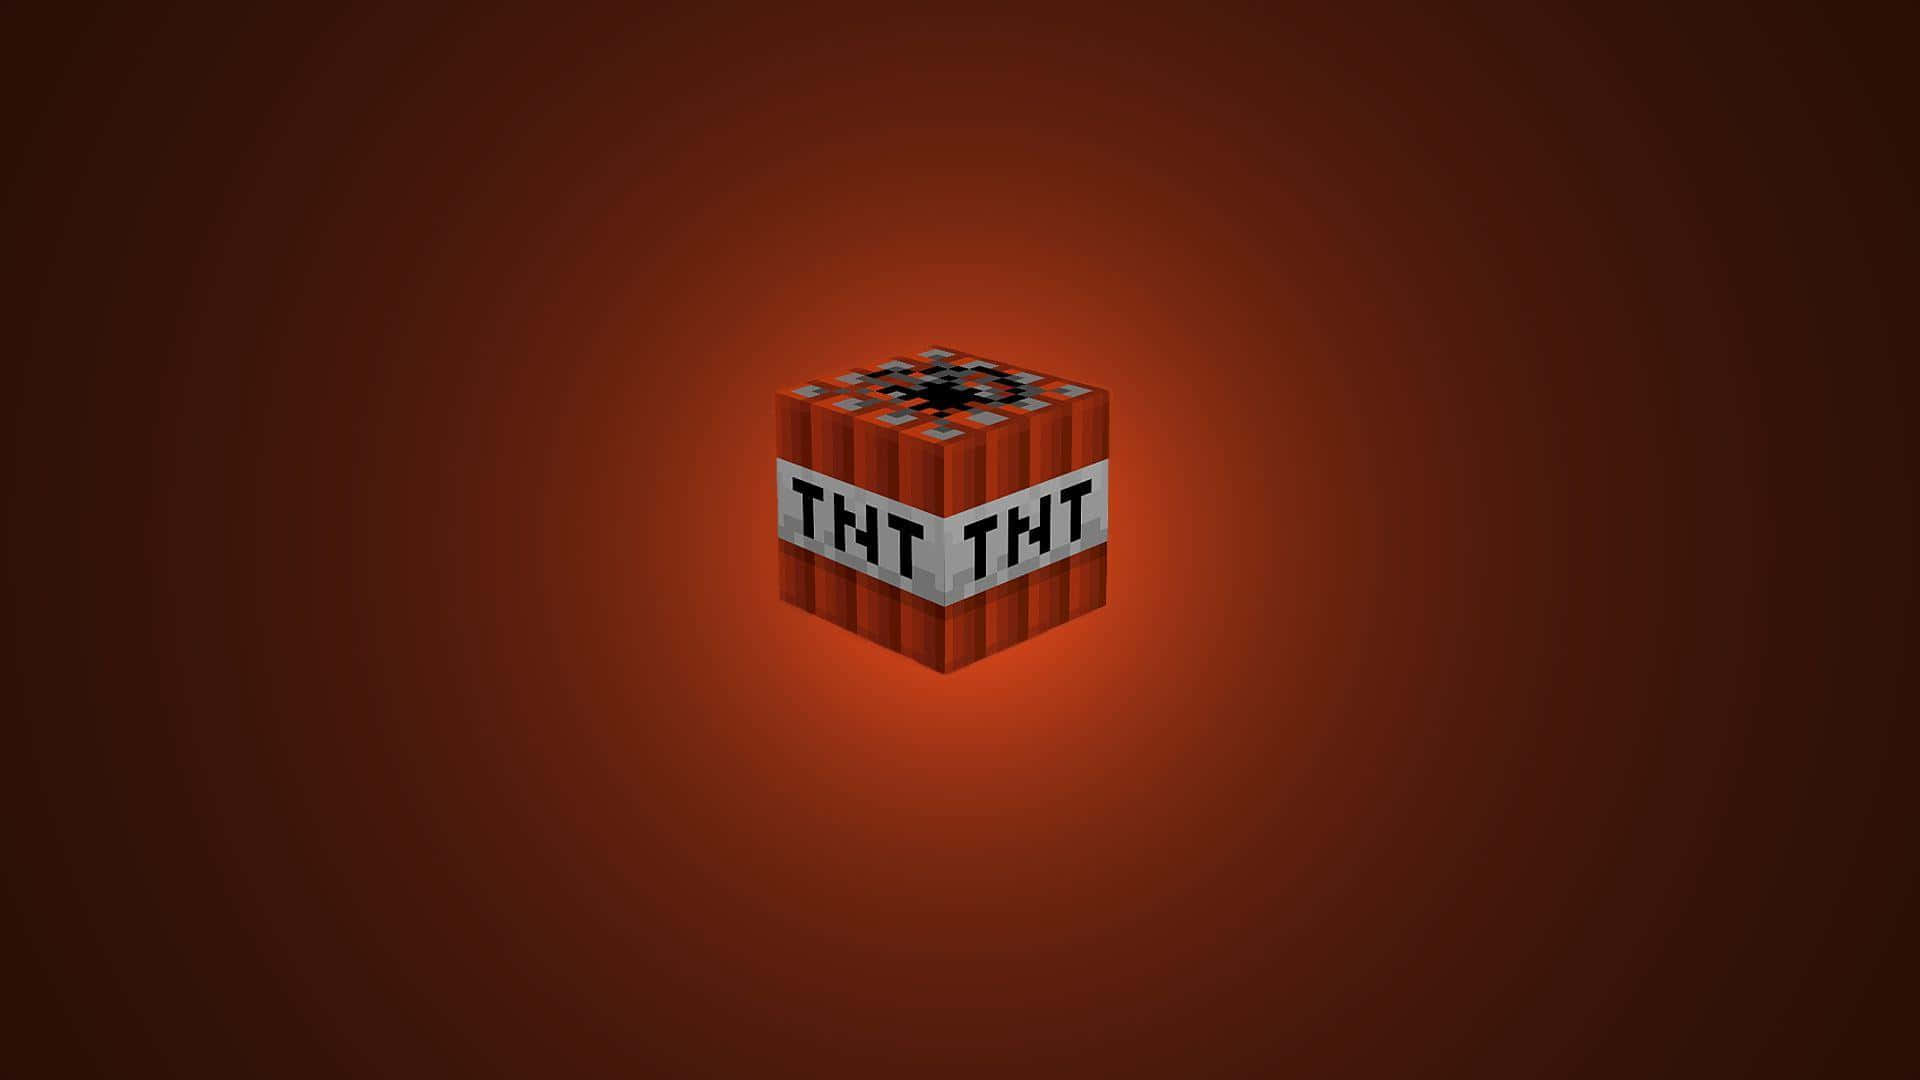 Build your world with Minecraft TNT Wallpaper